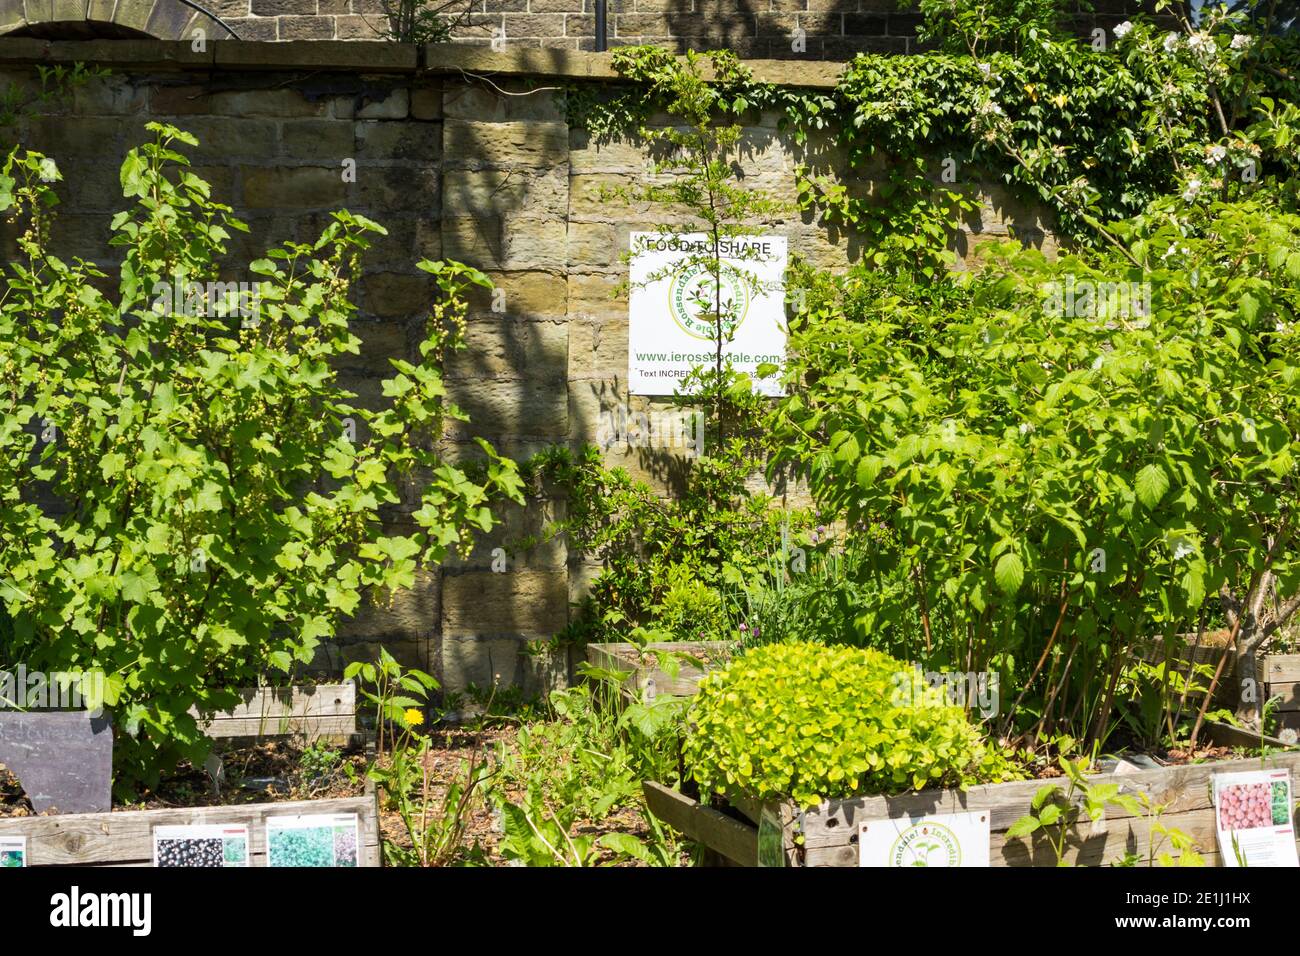 Incredible Edible, volunteer maintained, 'Food to Share' garden in the ground of the Whitaker museum, Rawtenstall. Stock Photo